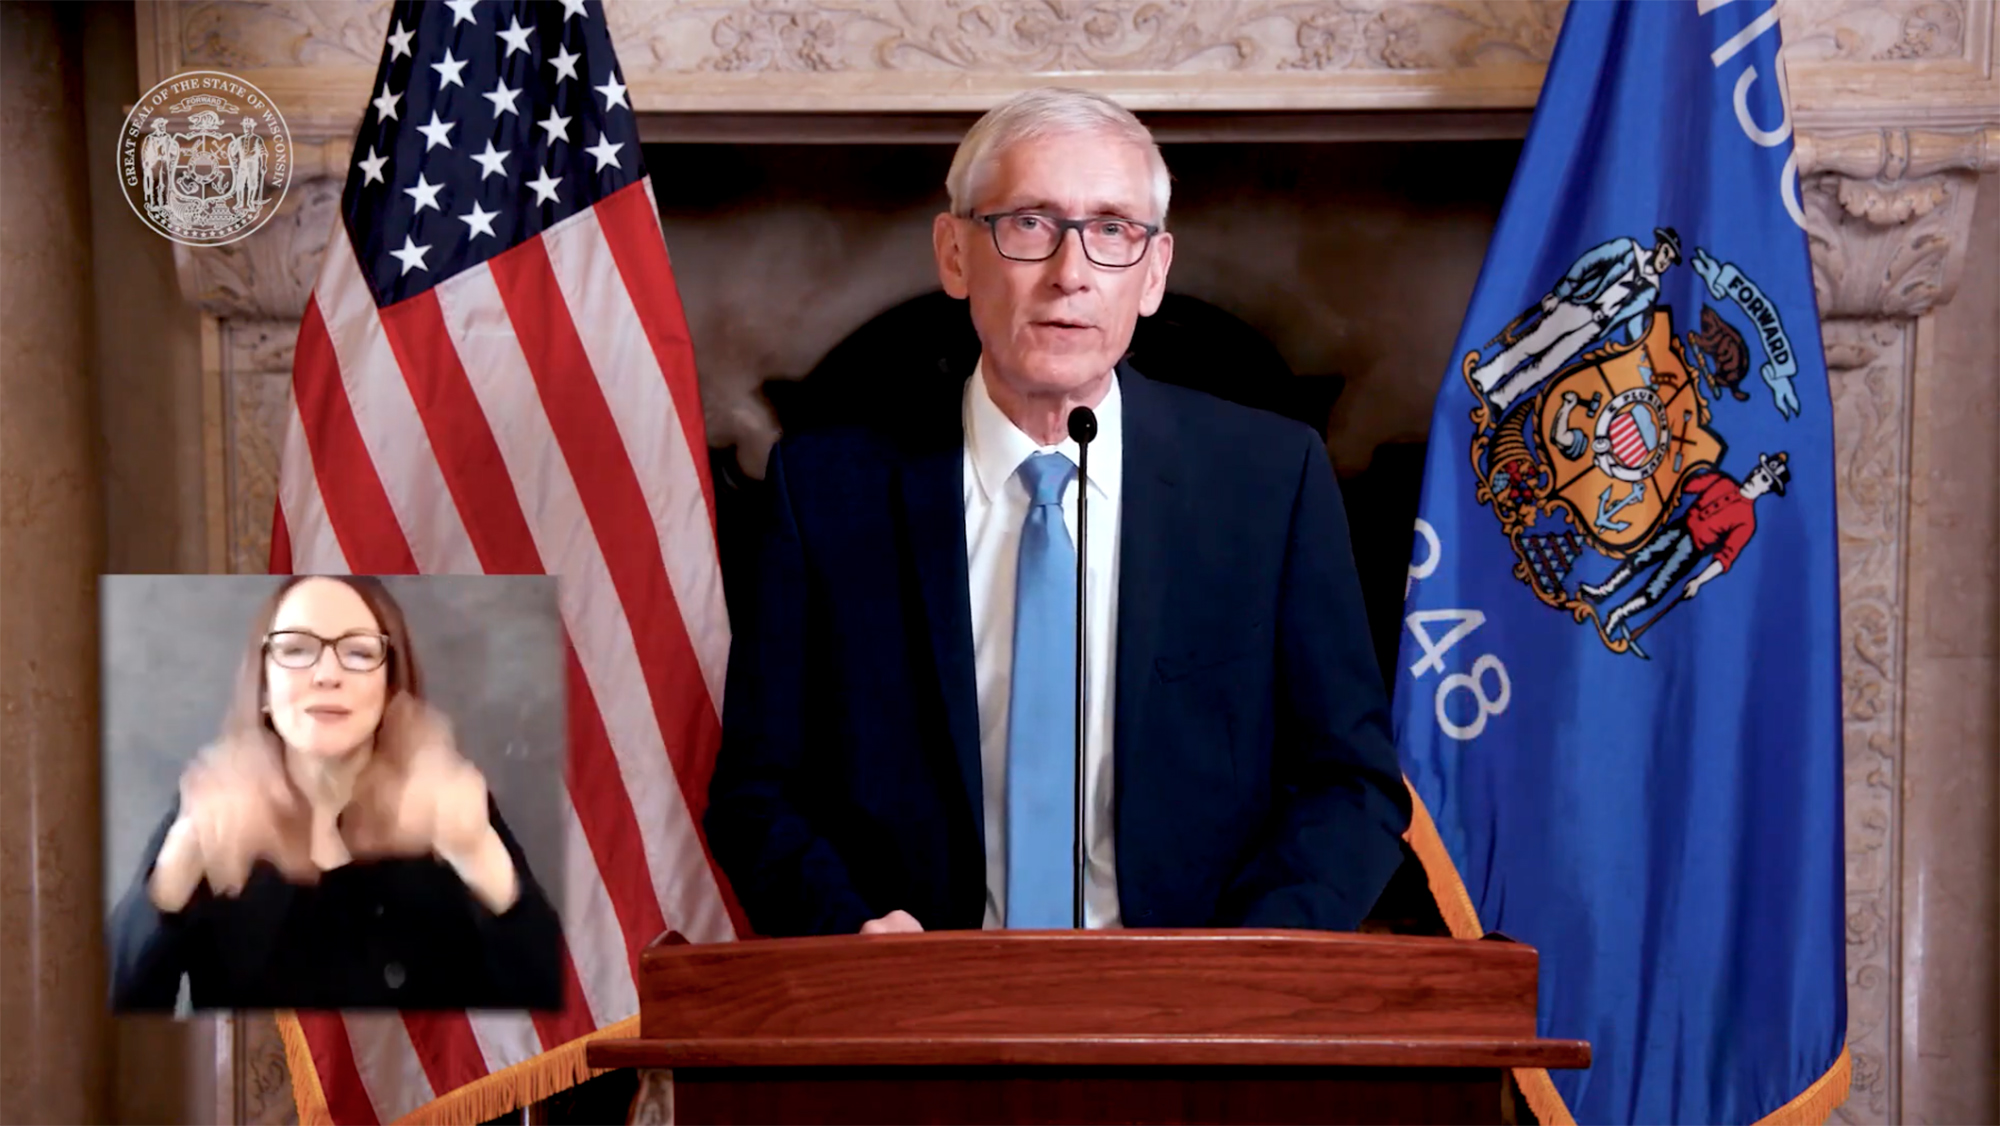 Gov. Tony Evers delivers his 2021 State of the State Address